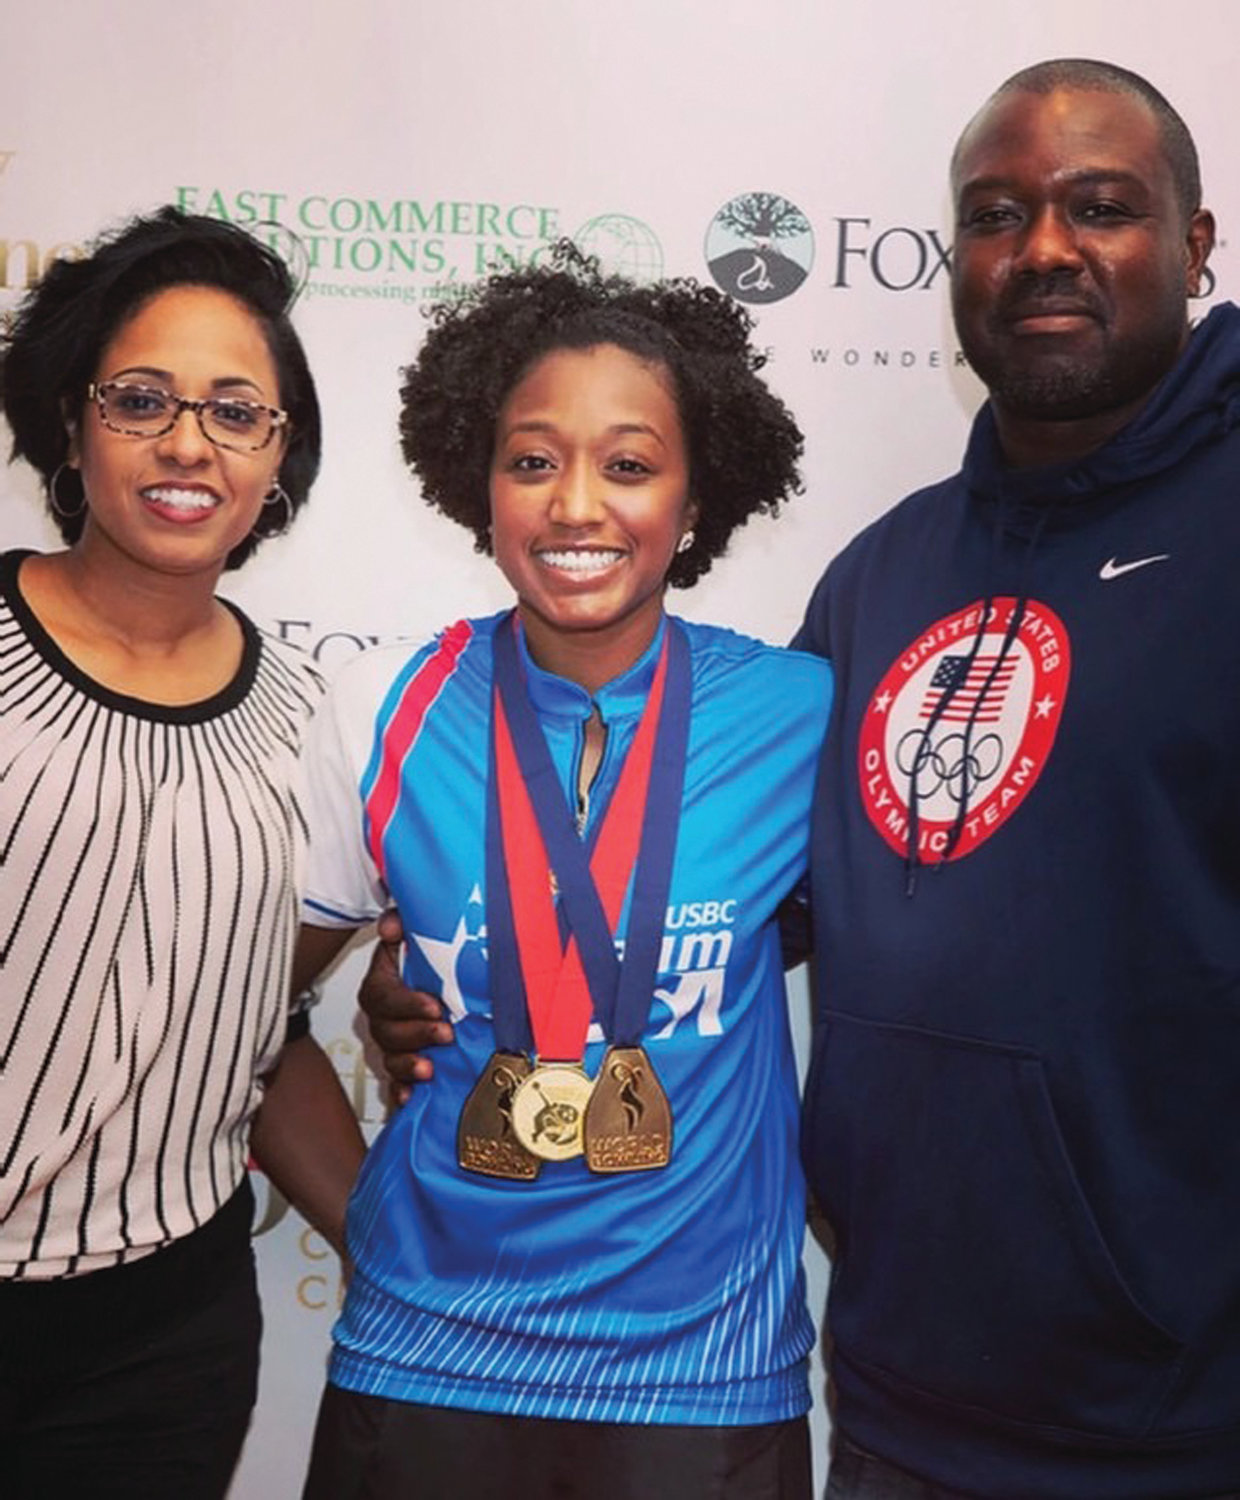 GOING FOR GOLD: Gazmine Mason shows off her gold medals while sharing a moment with her mother, Danielle Daley-Mason, and father, George Mason.